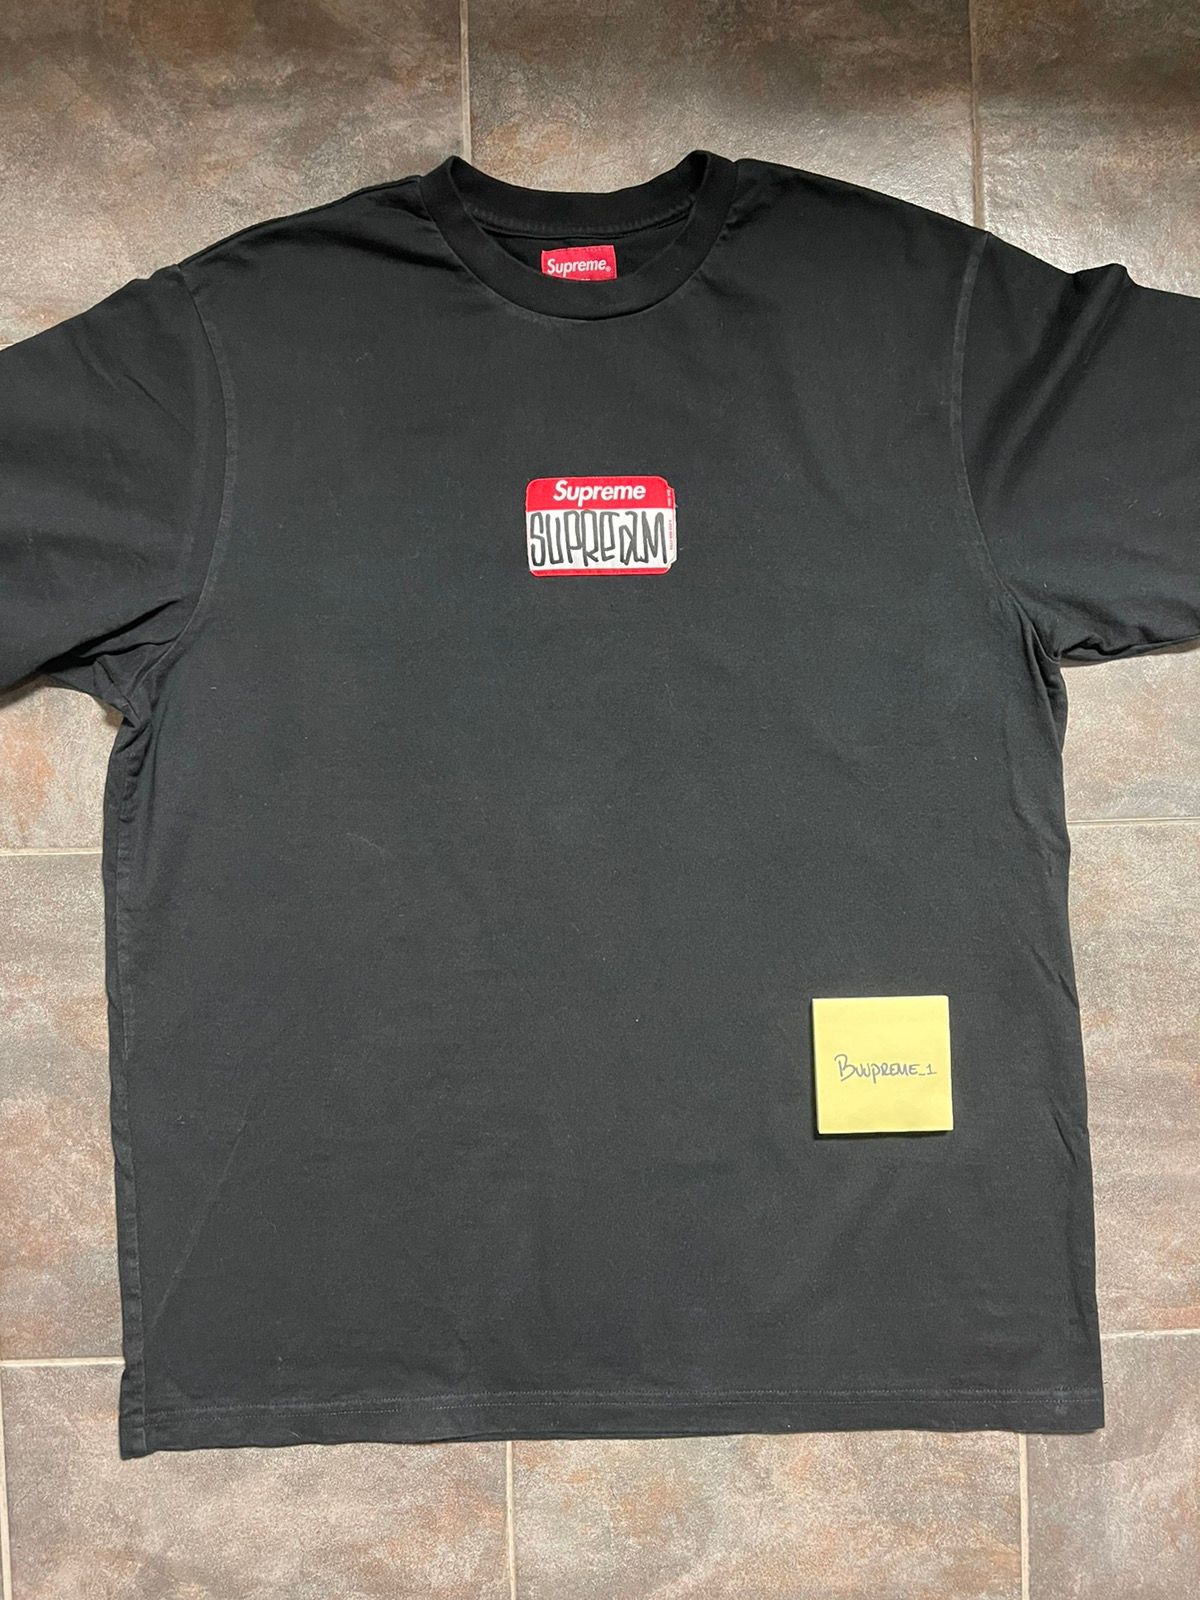 Supreme GONZ NAME TAG TEE | Grailed